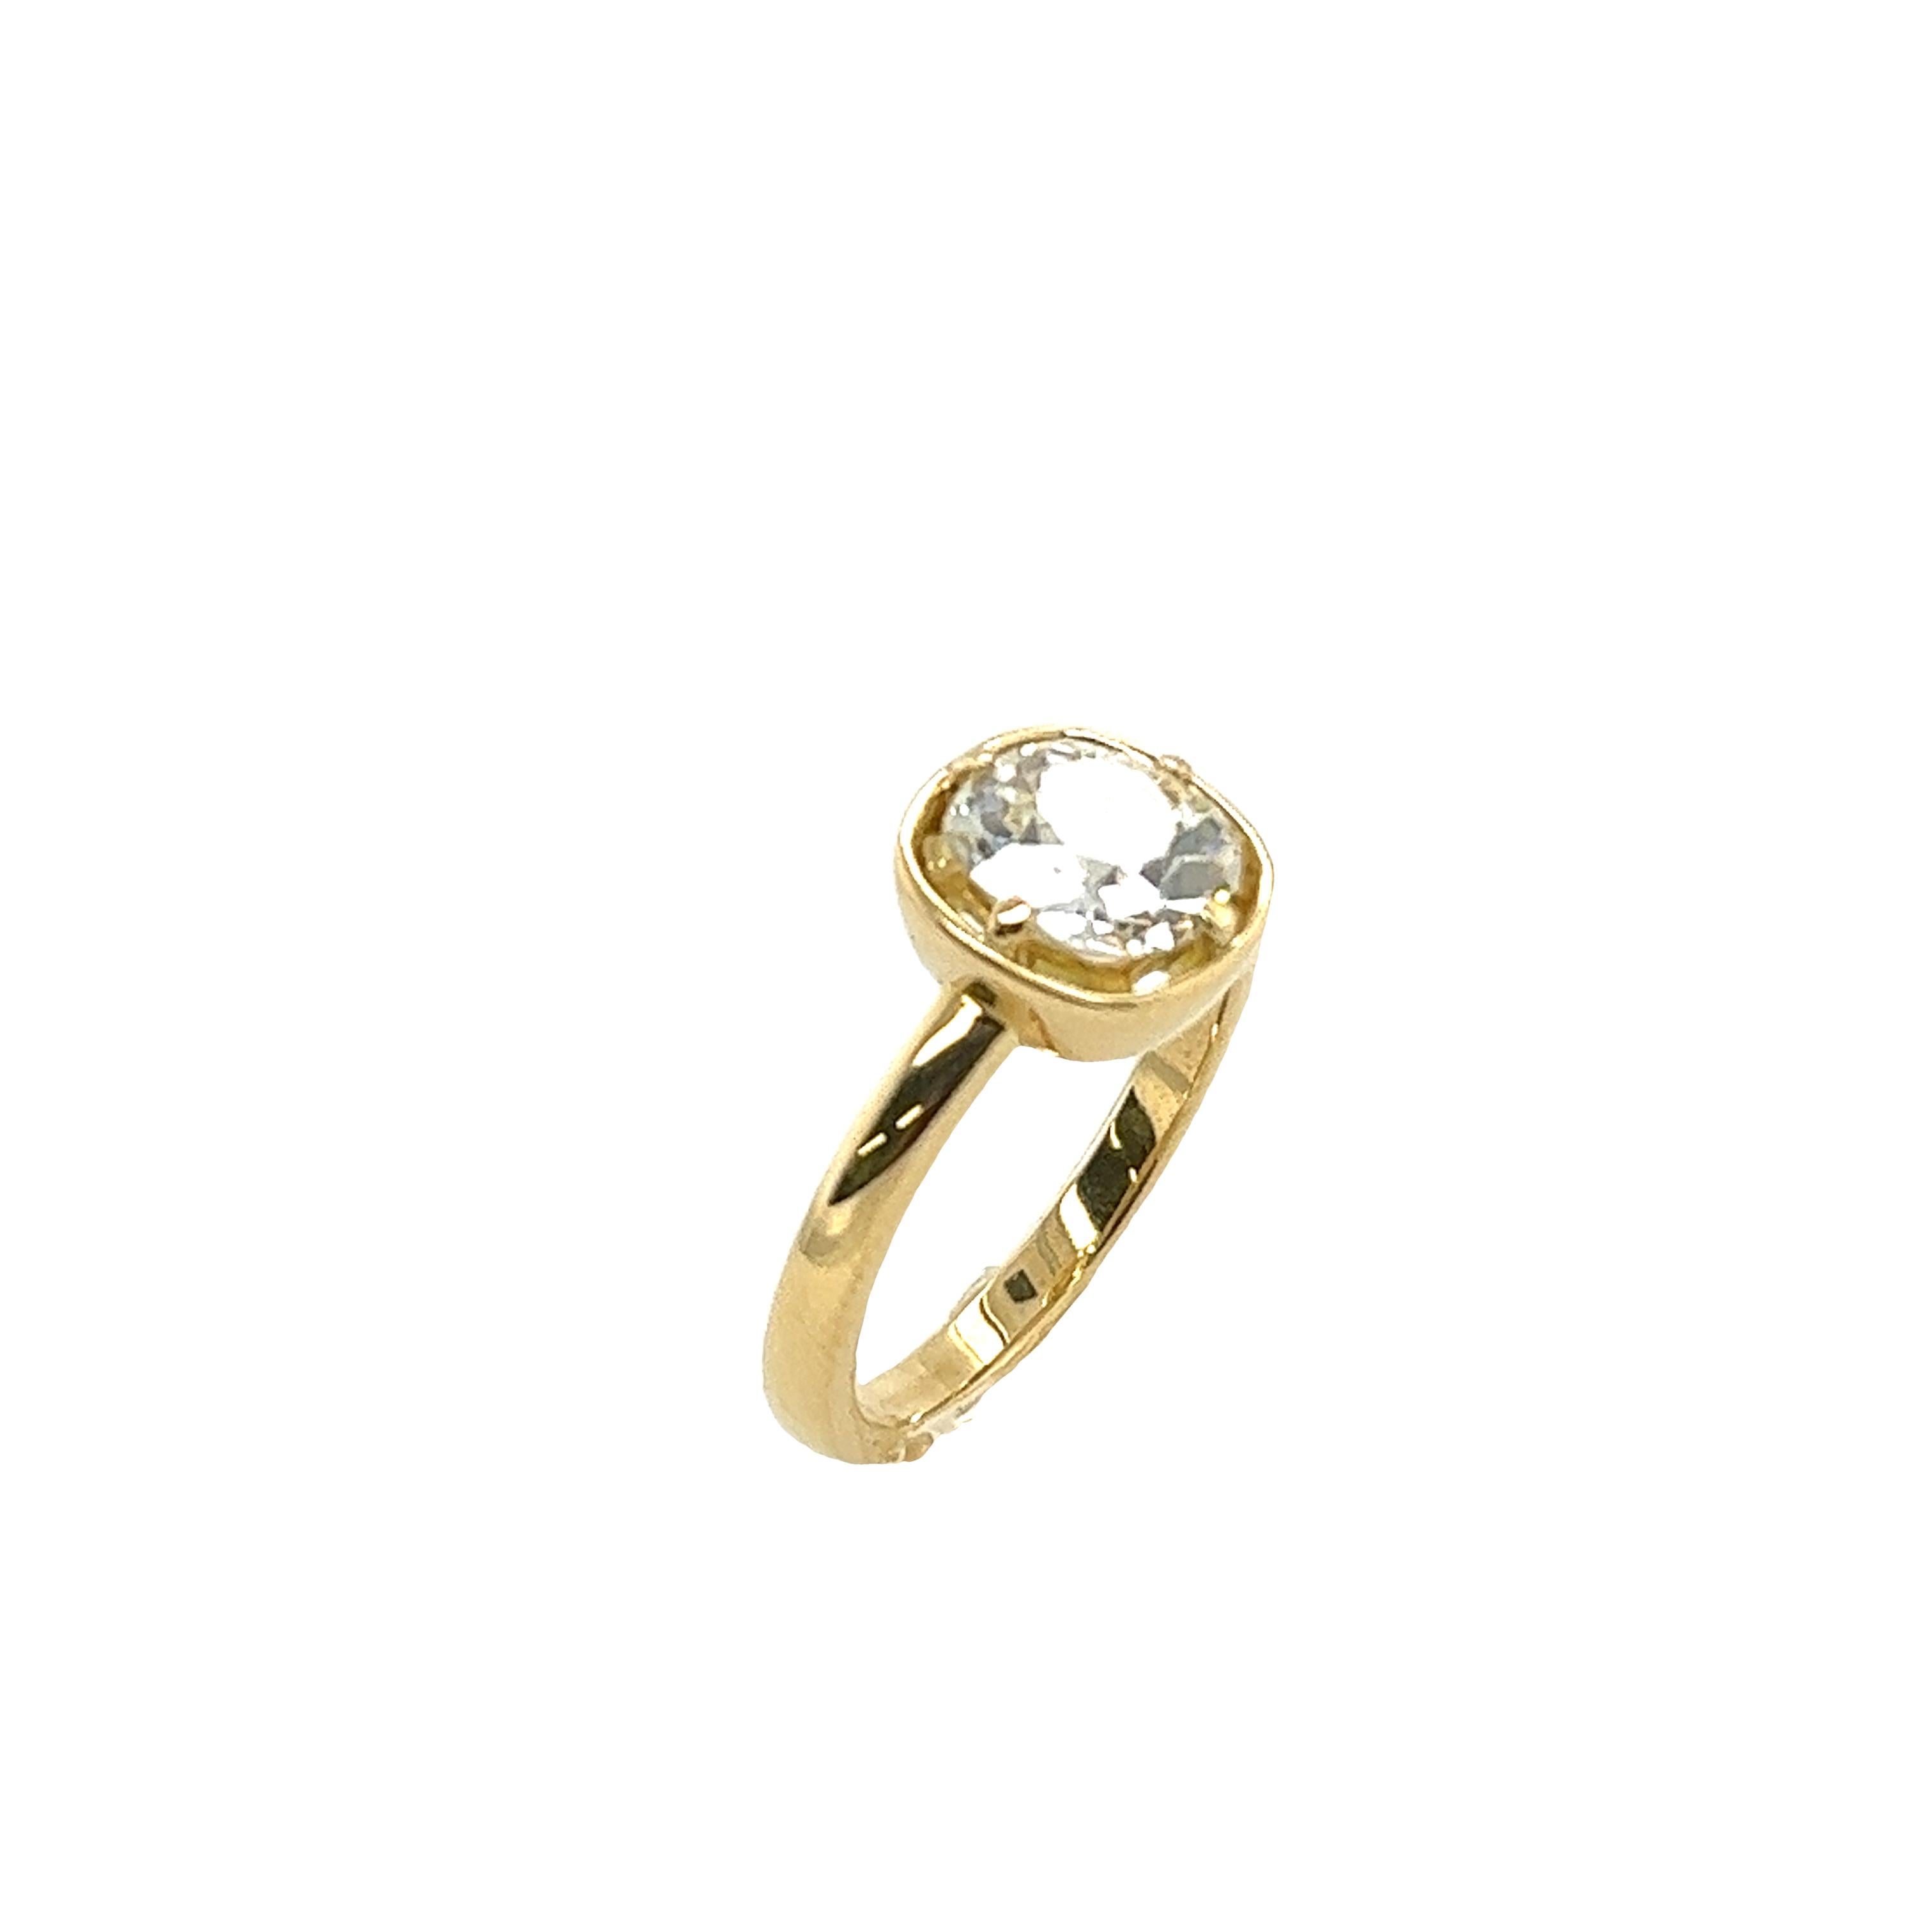 An elegant diamond ring for your engagement,  set with 1.71ct K colour and SI2 clarity old cut cushion diamond in 18ct yellow gold setting.
A beautiful and elegant choice for an engagement ring or a special occasion.

Total Diamond Weight: